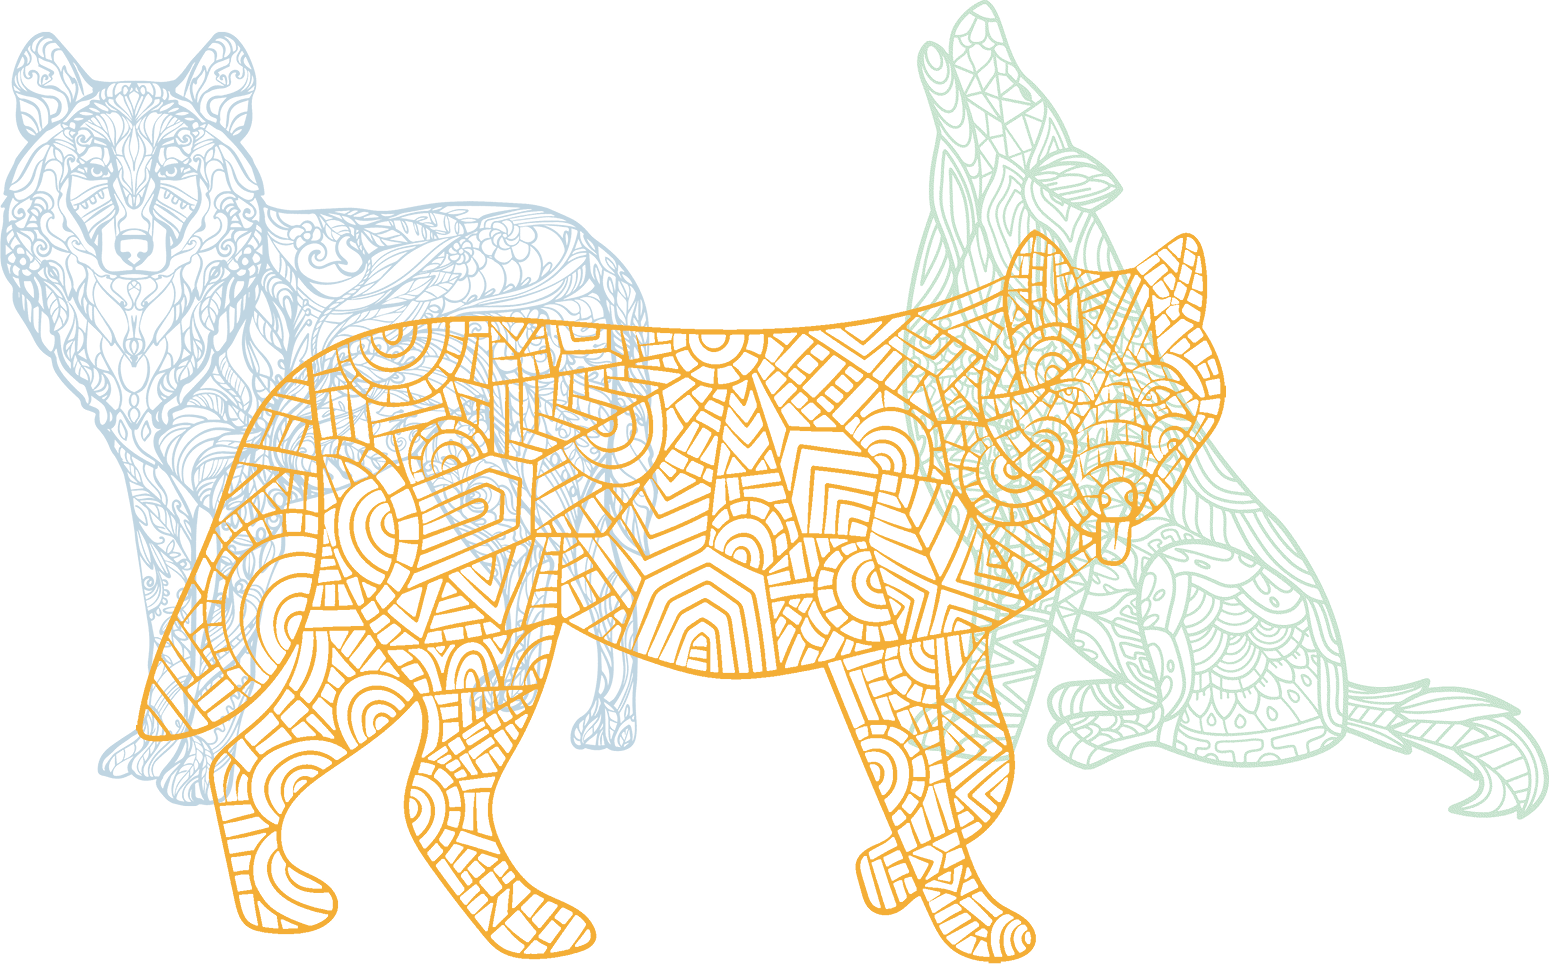 Wolves in Colorful Mandala Style Artwork on a Granite Bay Graphic Design Microsite